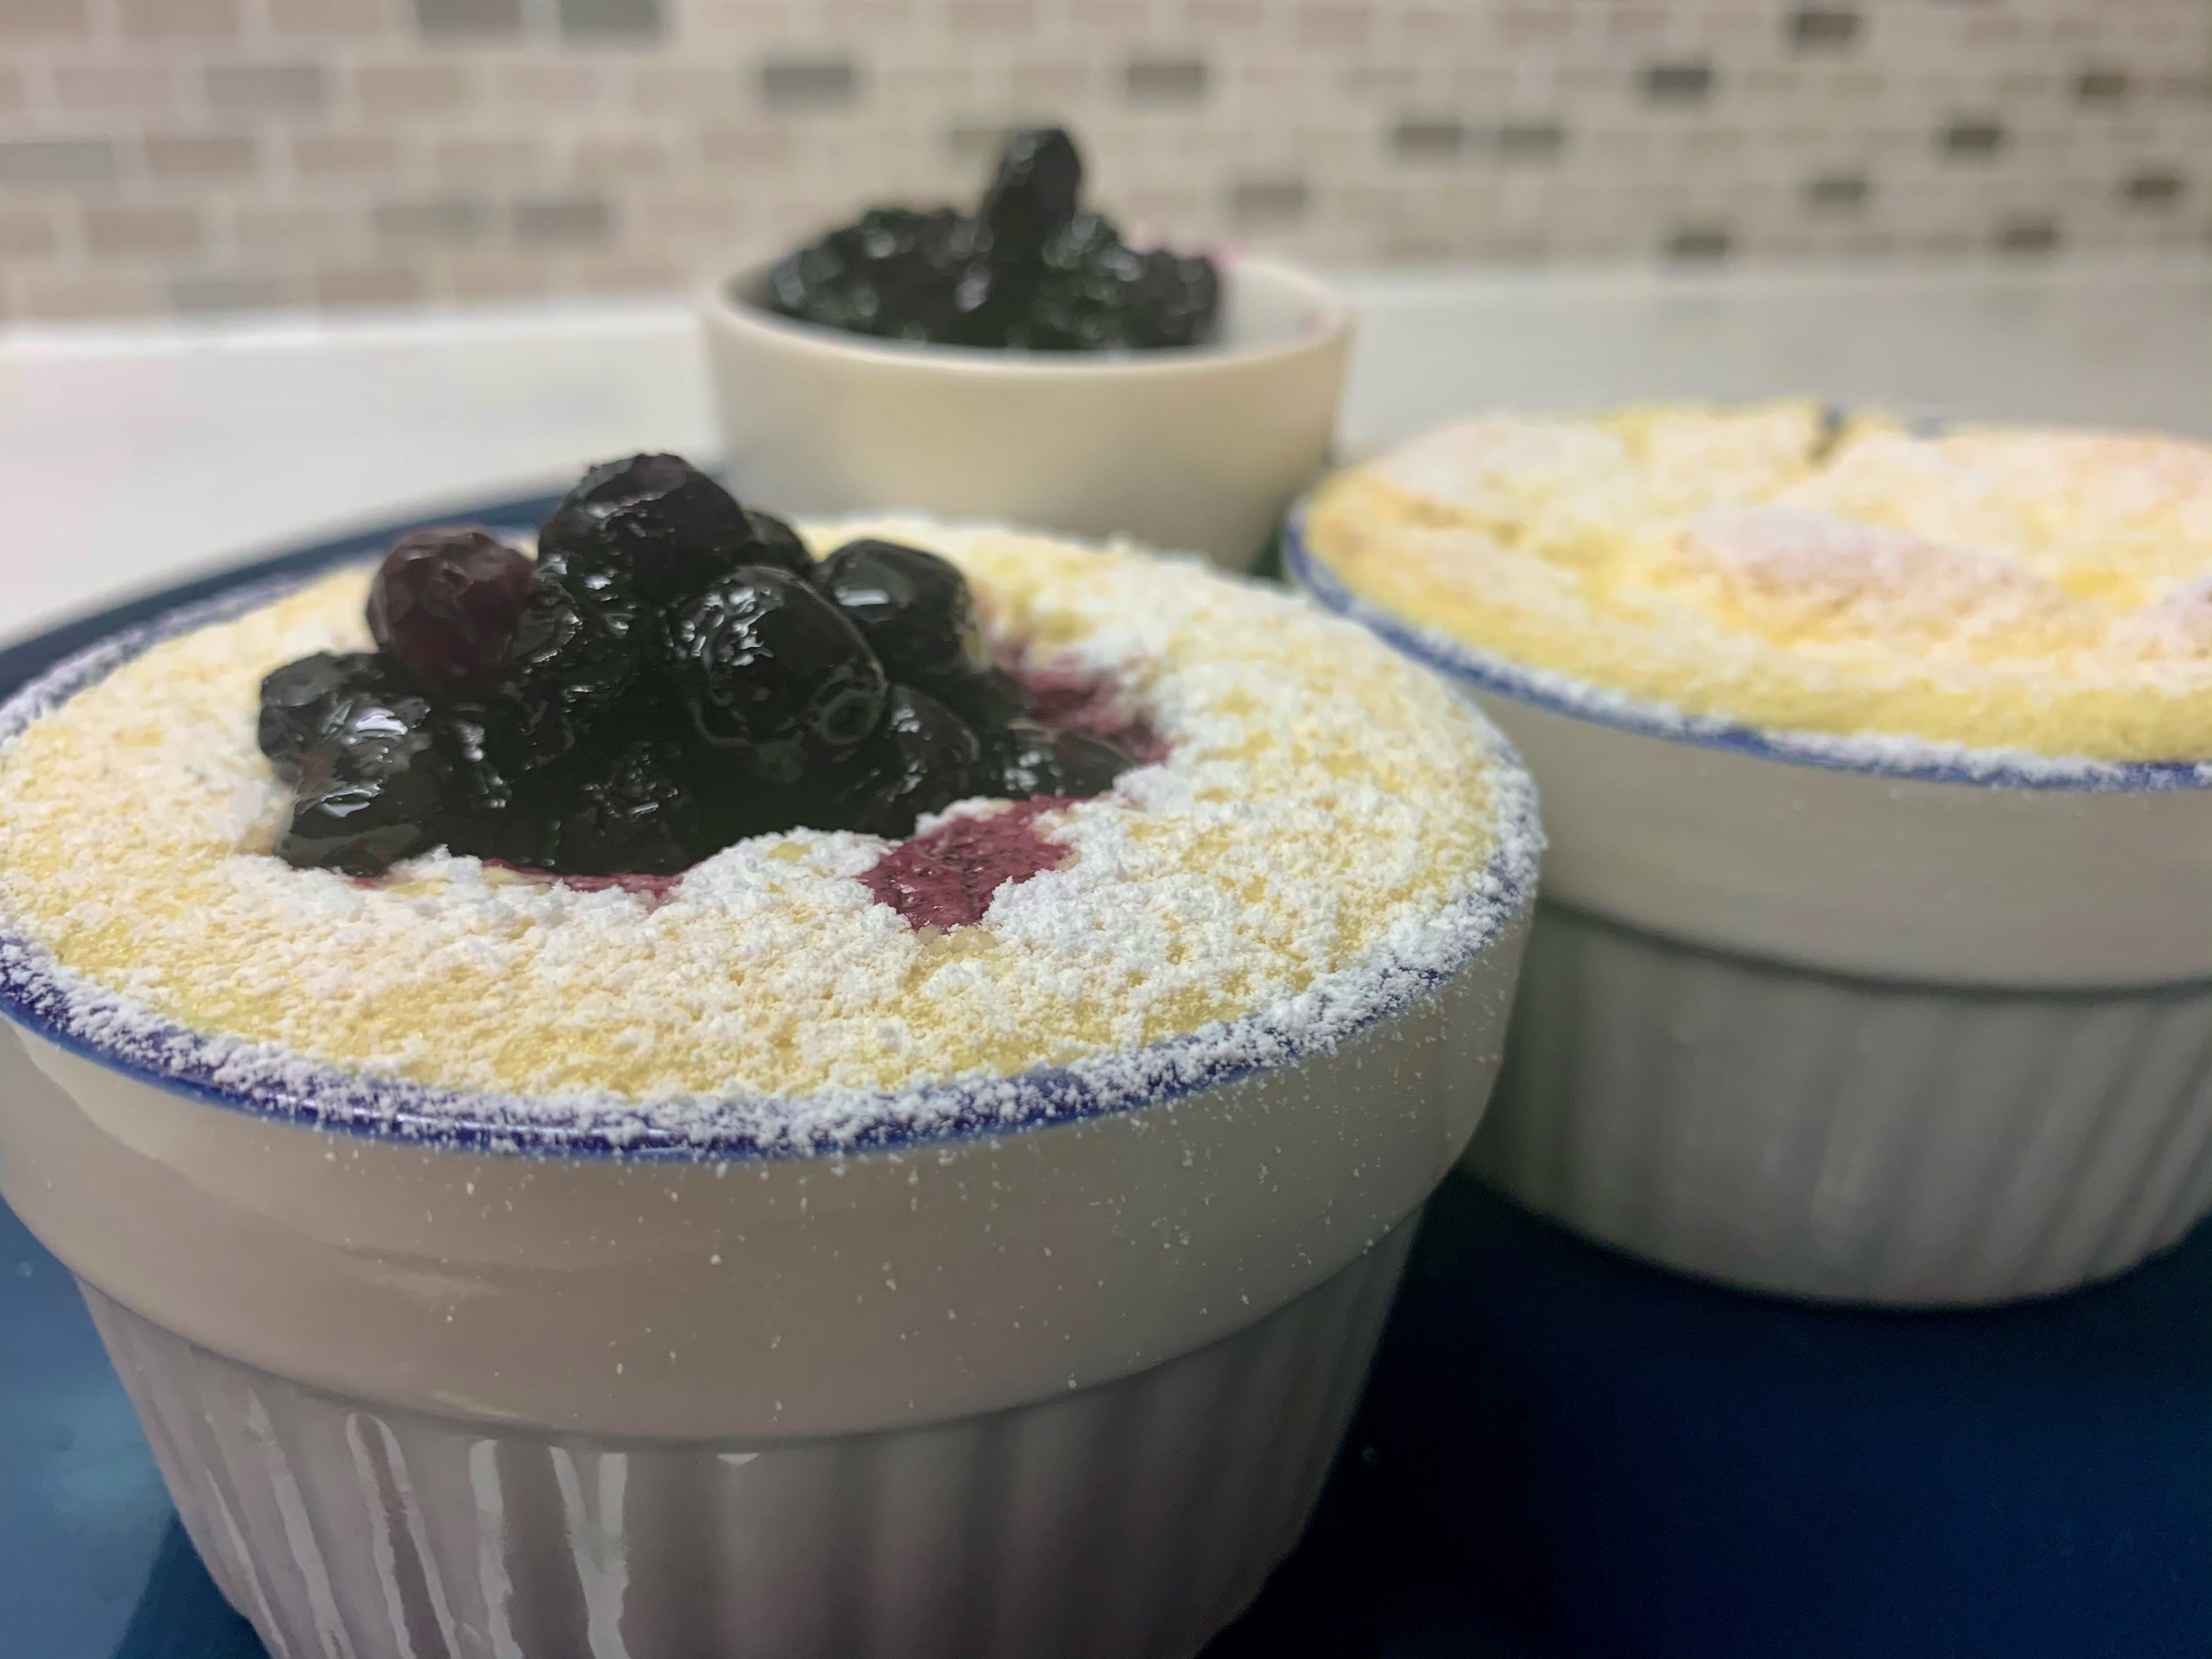 Baked Lemon Pudding With BC Blueberry Compote